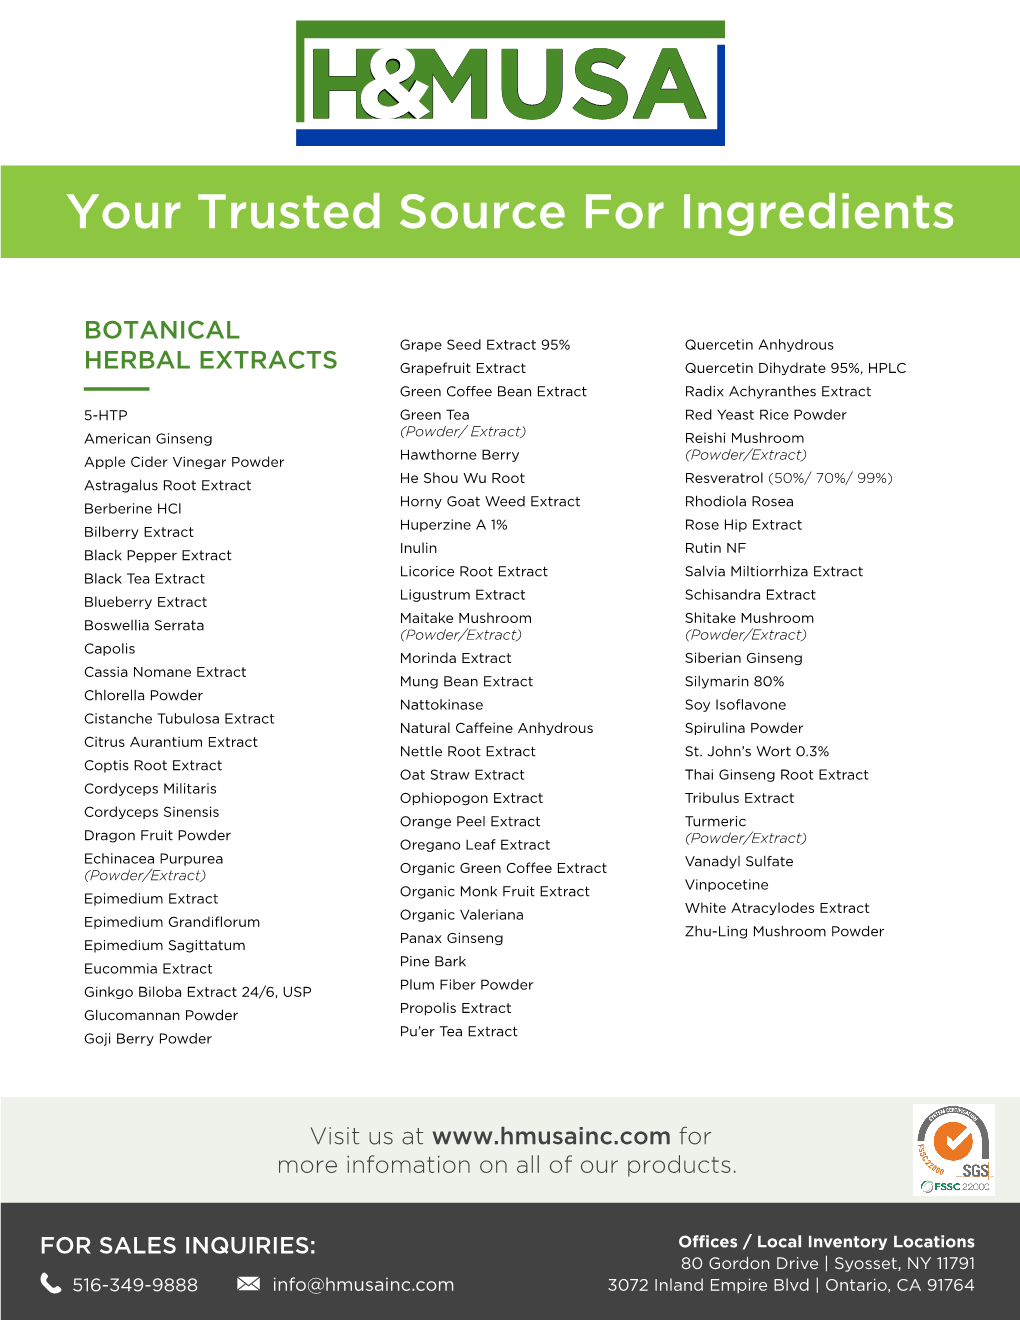 Your Trusted Source for Ingredients